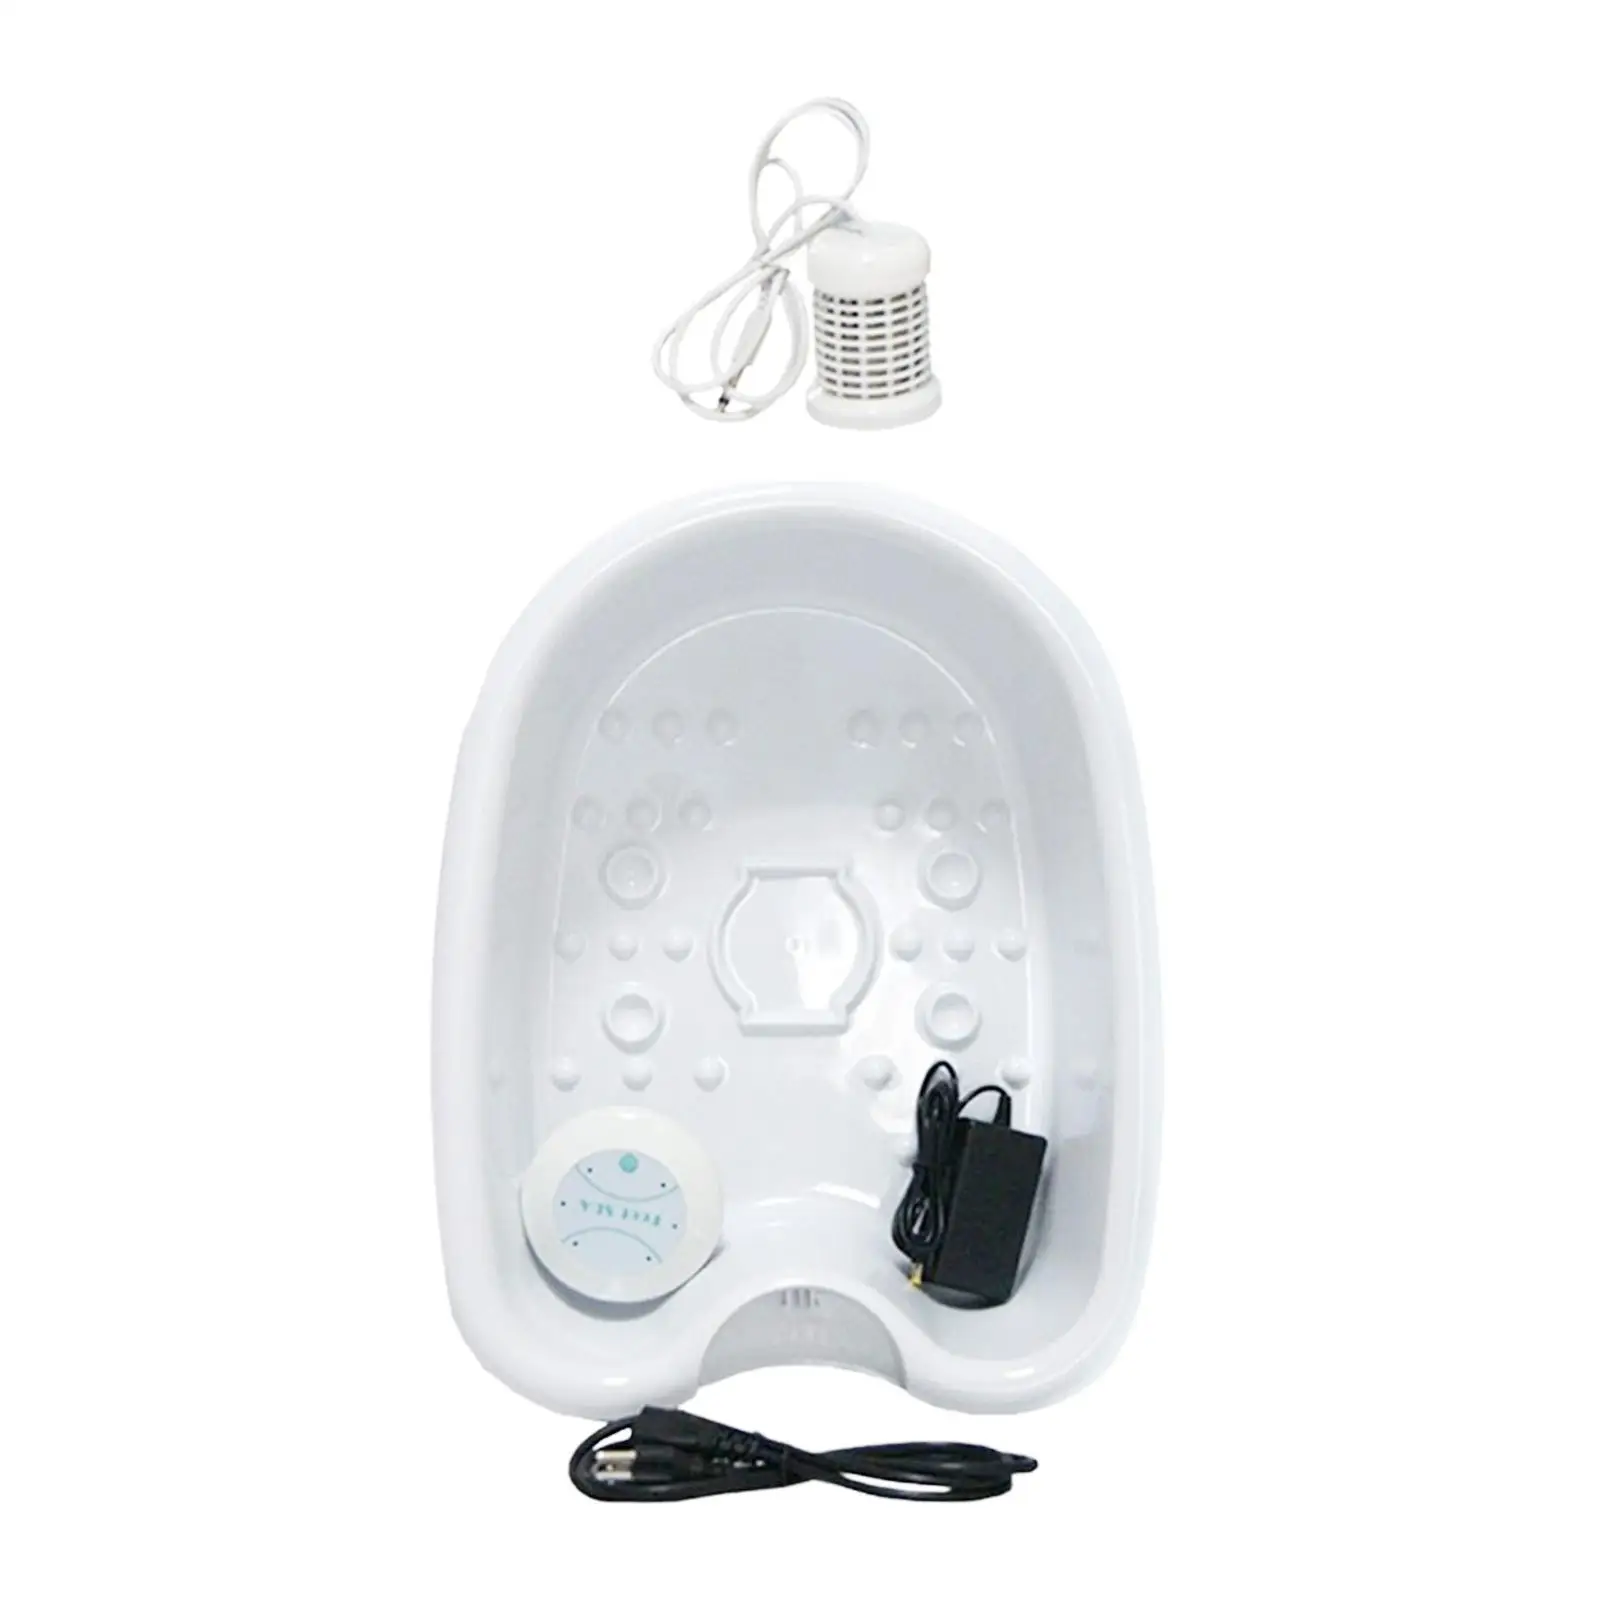    Foot Basin Personal Cleanse   Foot Bath  Machine Foot    Machine for Foot SPA Family Salon Home